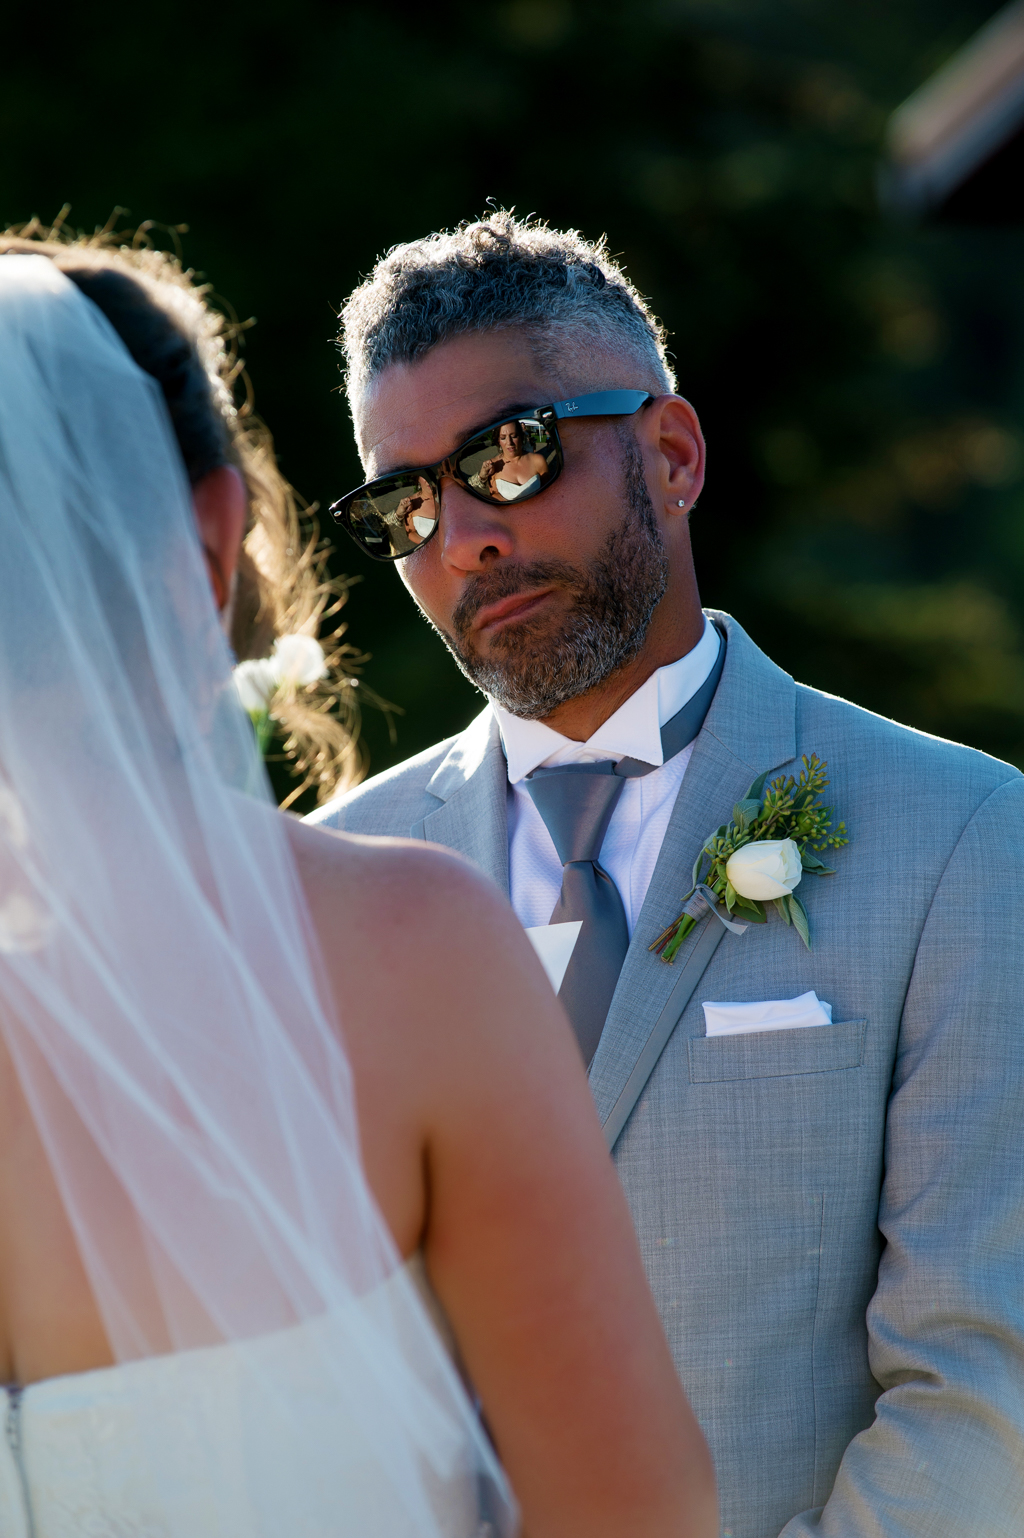 a brides reflection shows in the groom's sunglasses during their wedding vows